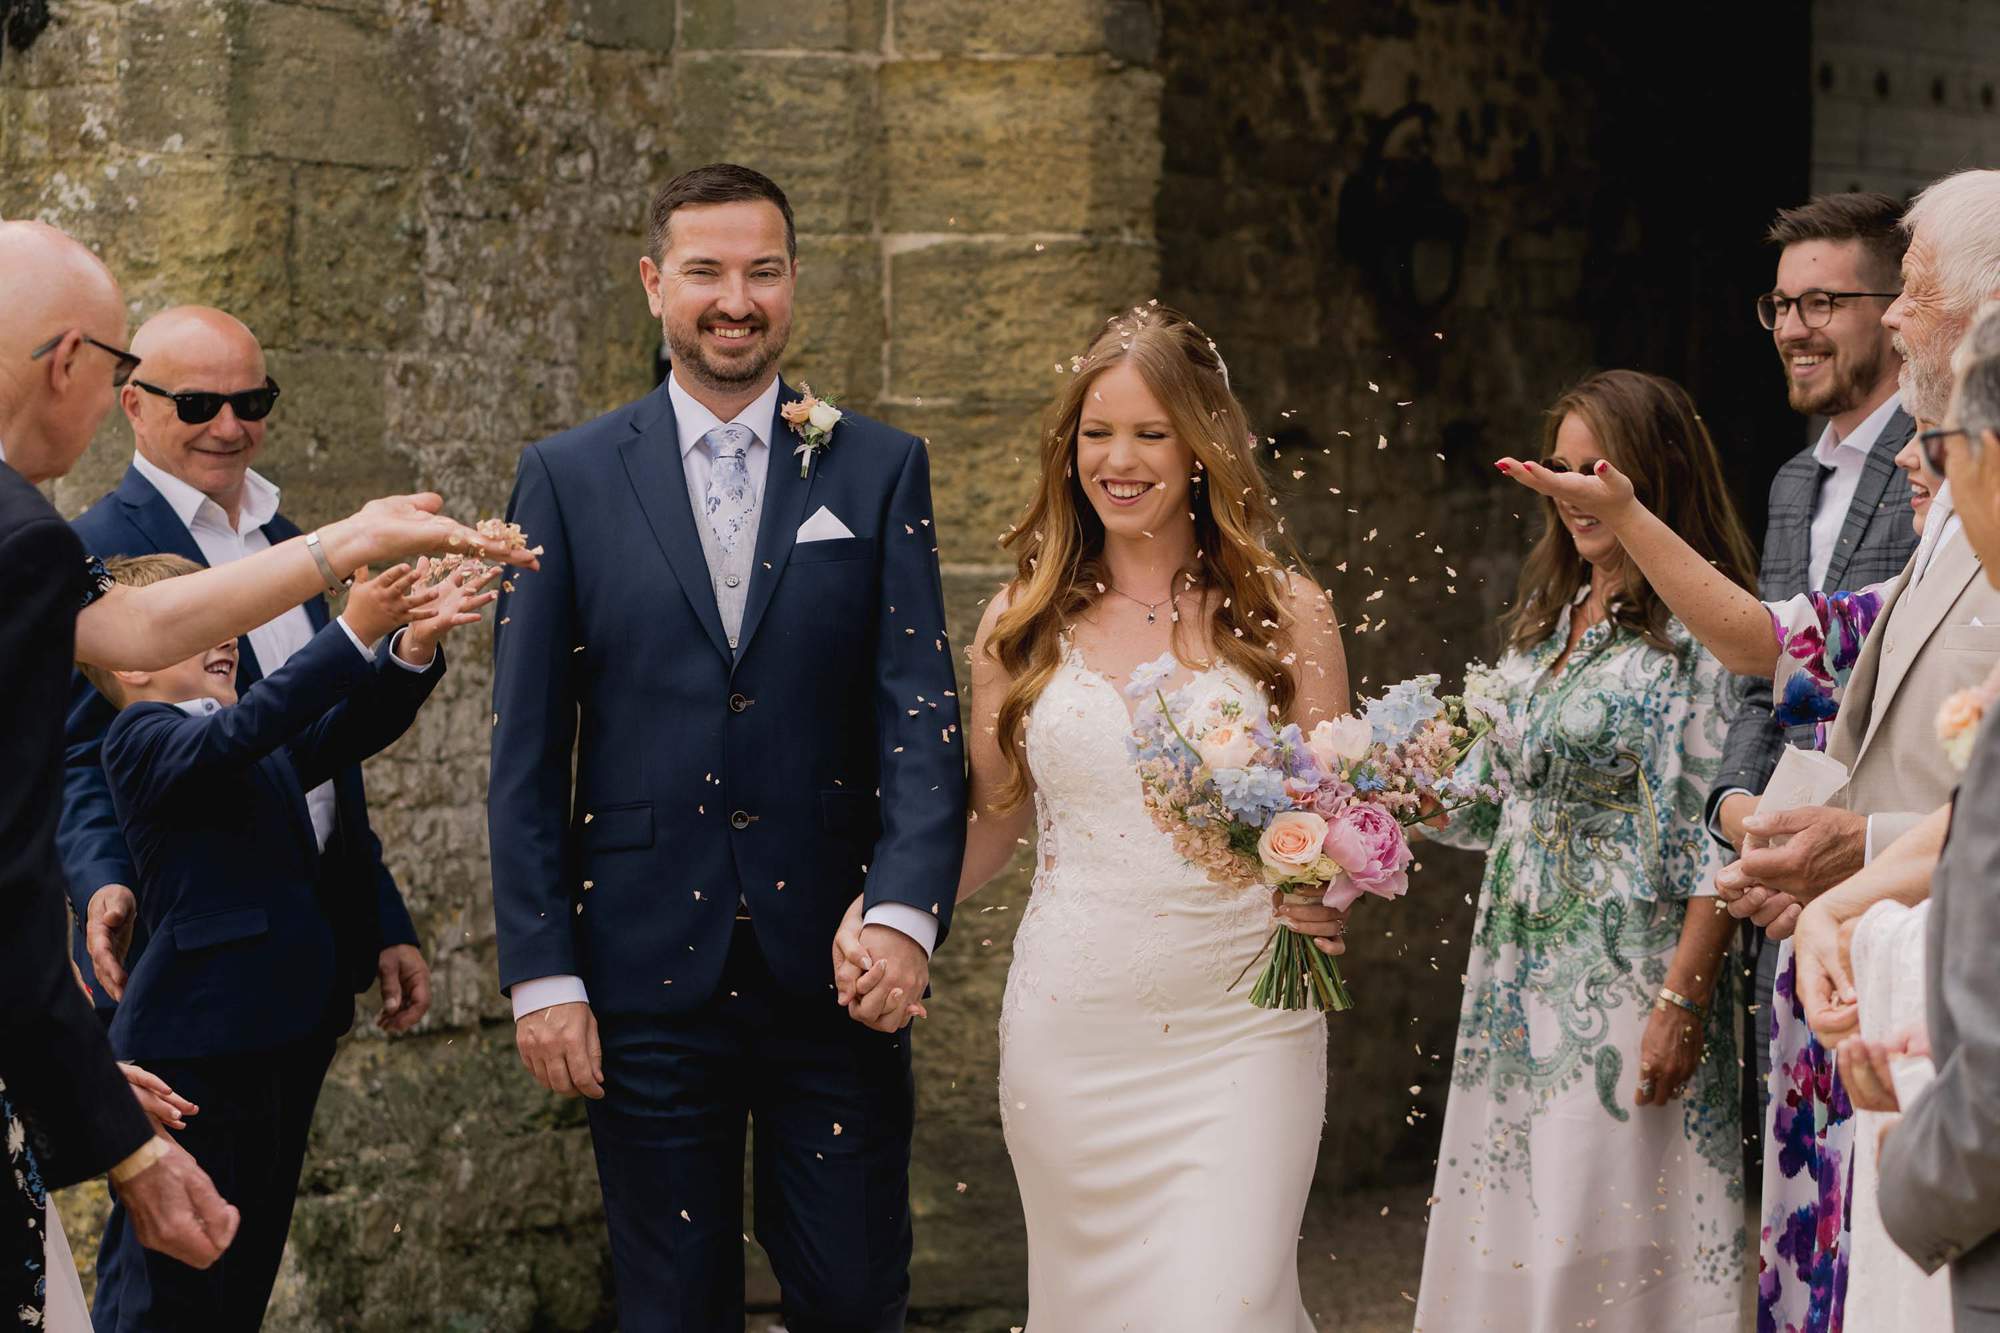 Wedding guests throw confetti at the bride and groom on their wedding day at Amberley Castle in West Sussex.